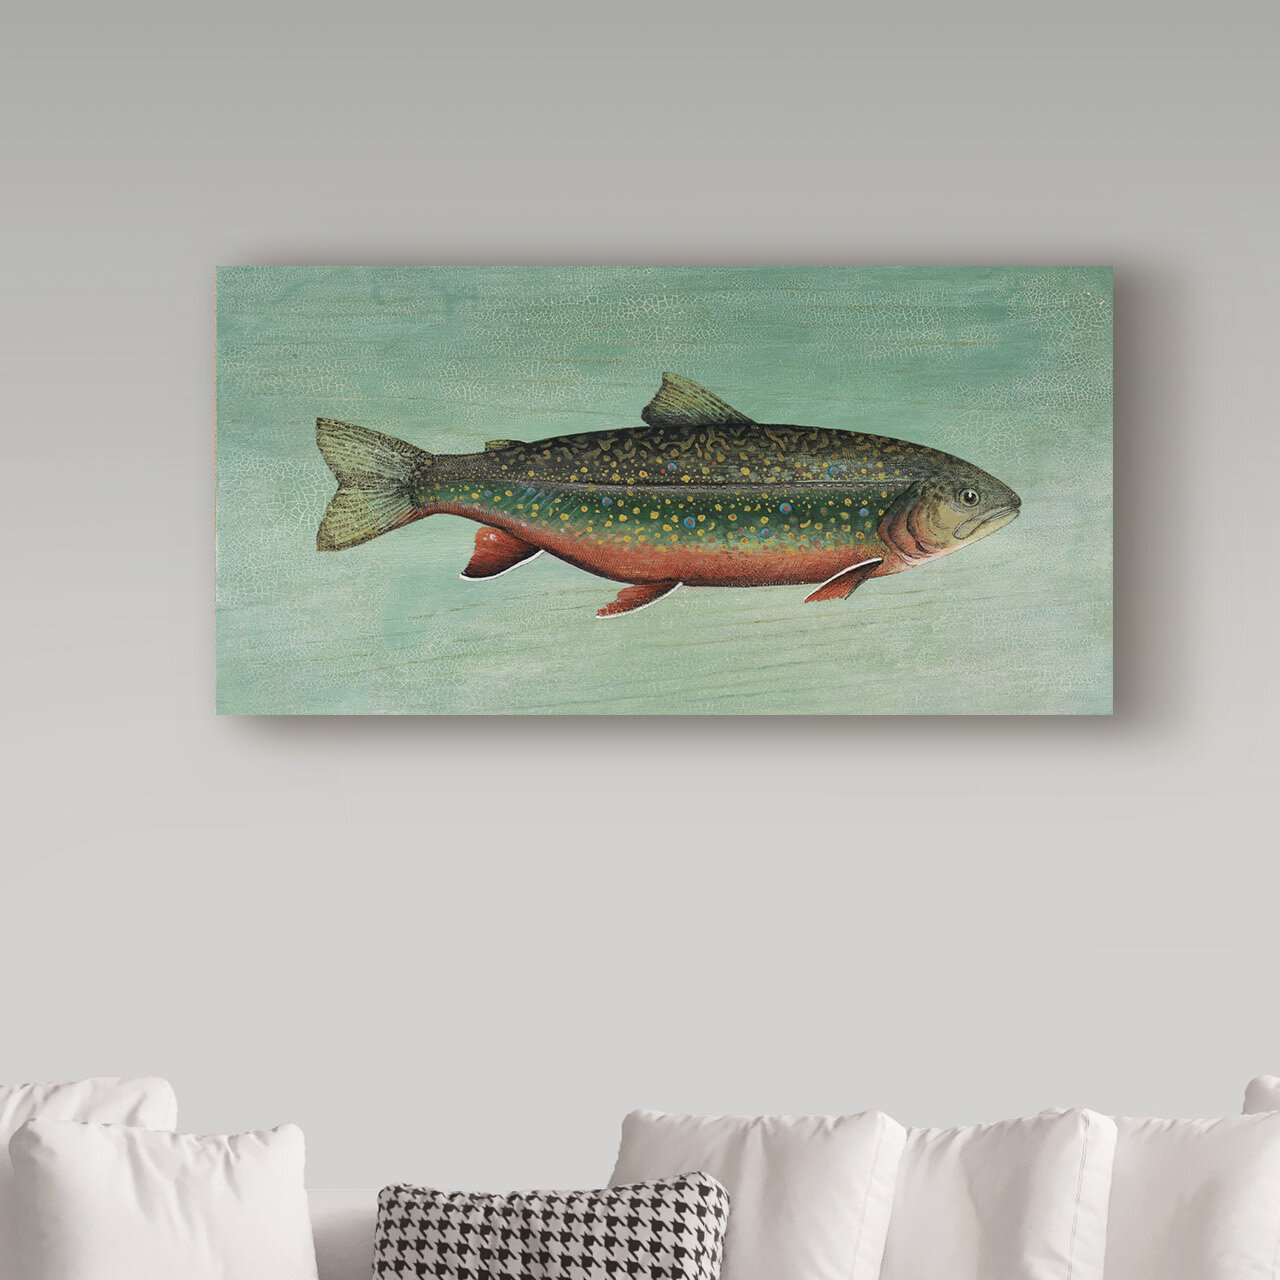 Highland Dunes Trout On Canvas by Lisa Audit Print & Reviews